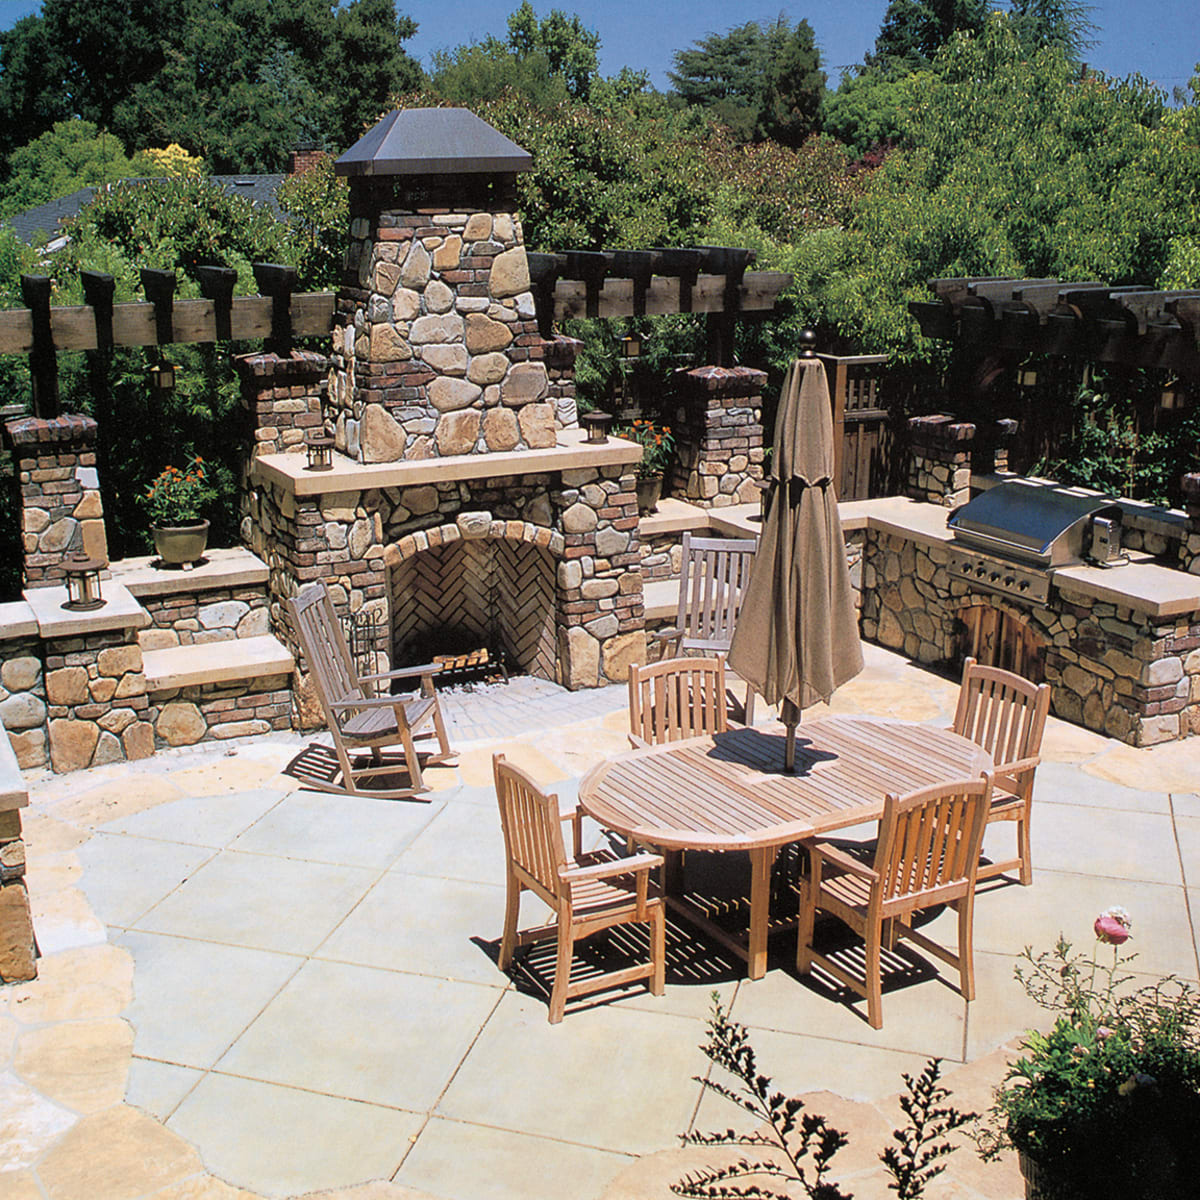 The Outdoor Hearth Fire Pit Barbecue, Spanish Tile Fire Pit